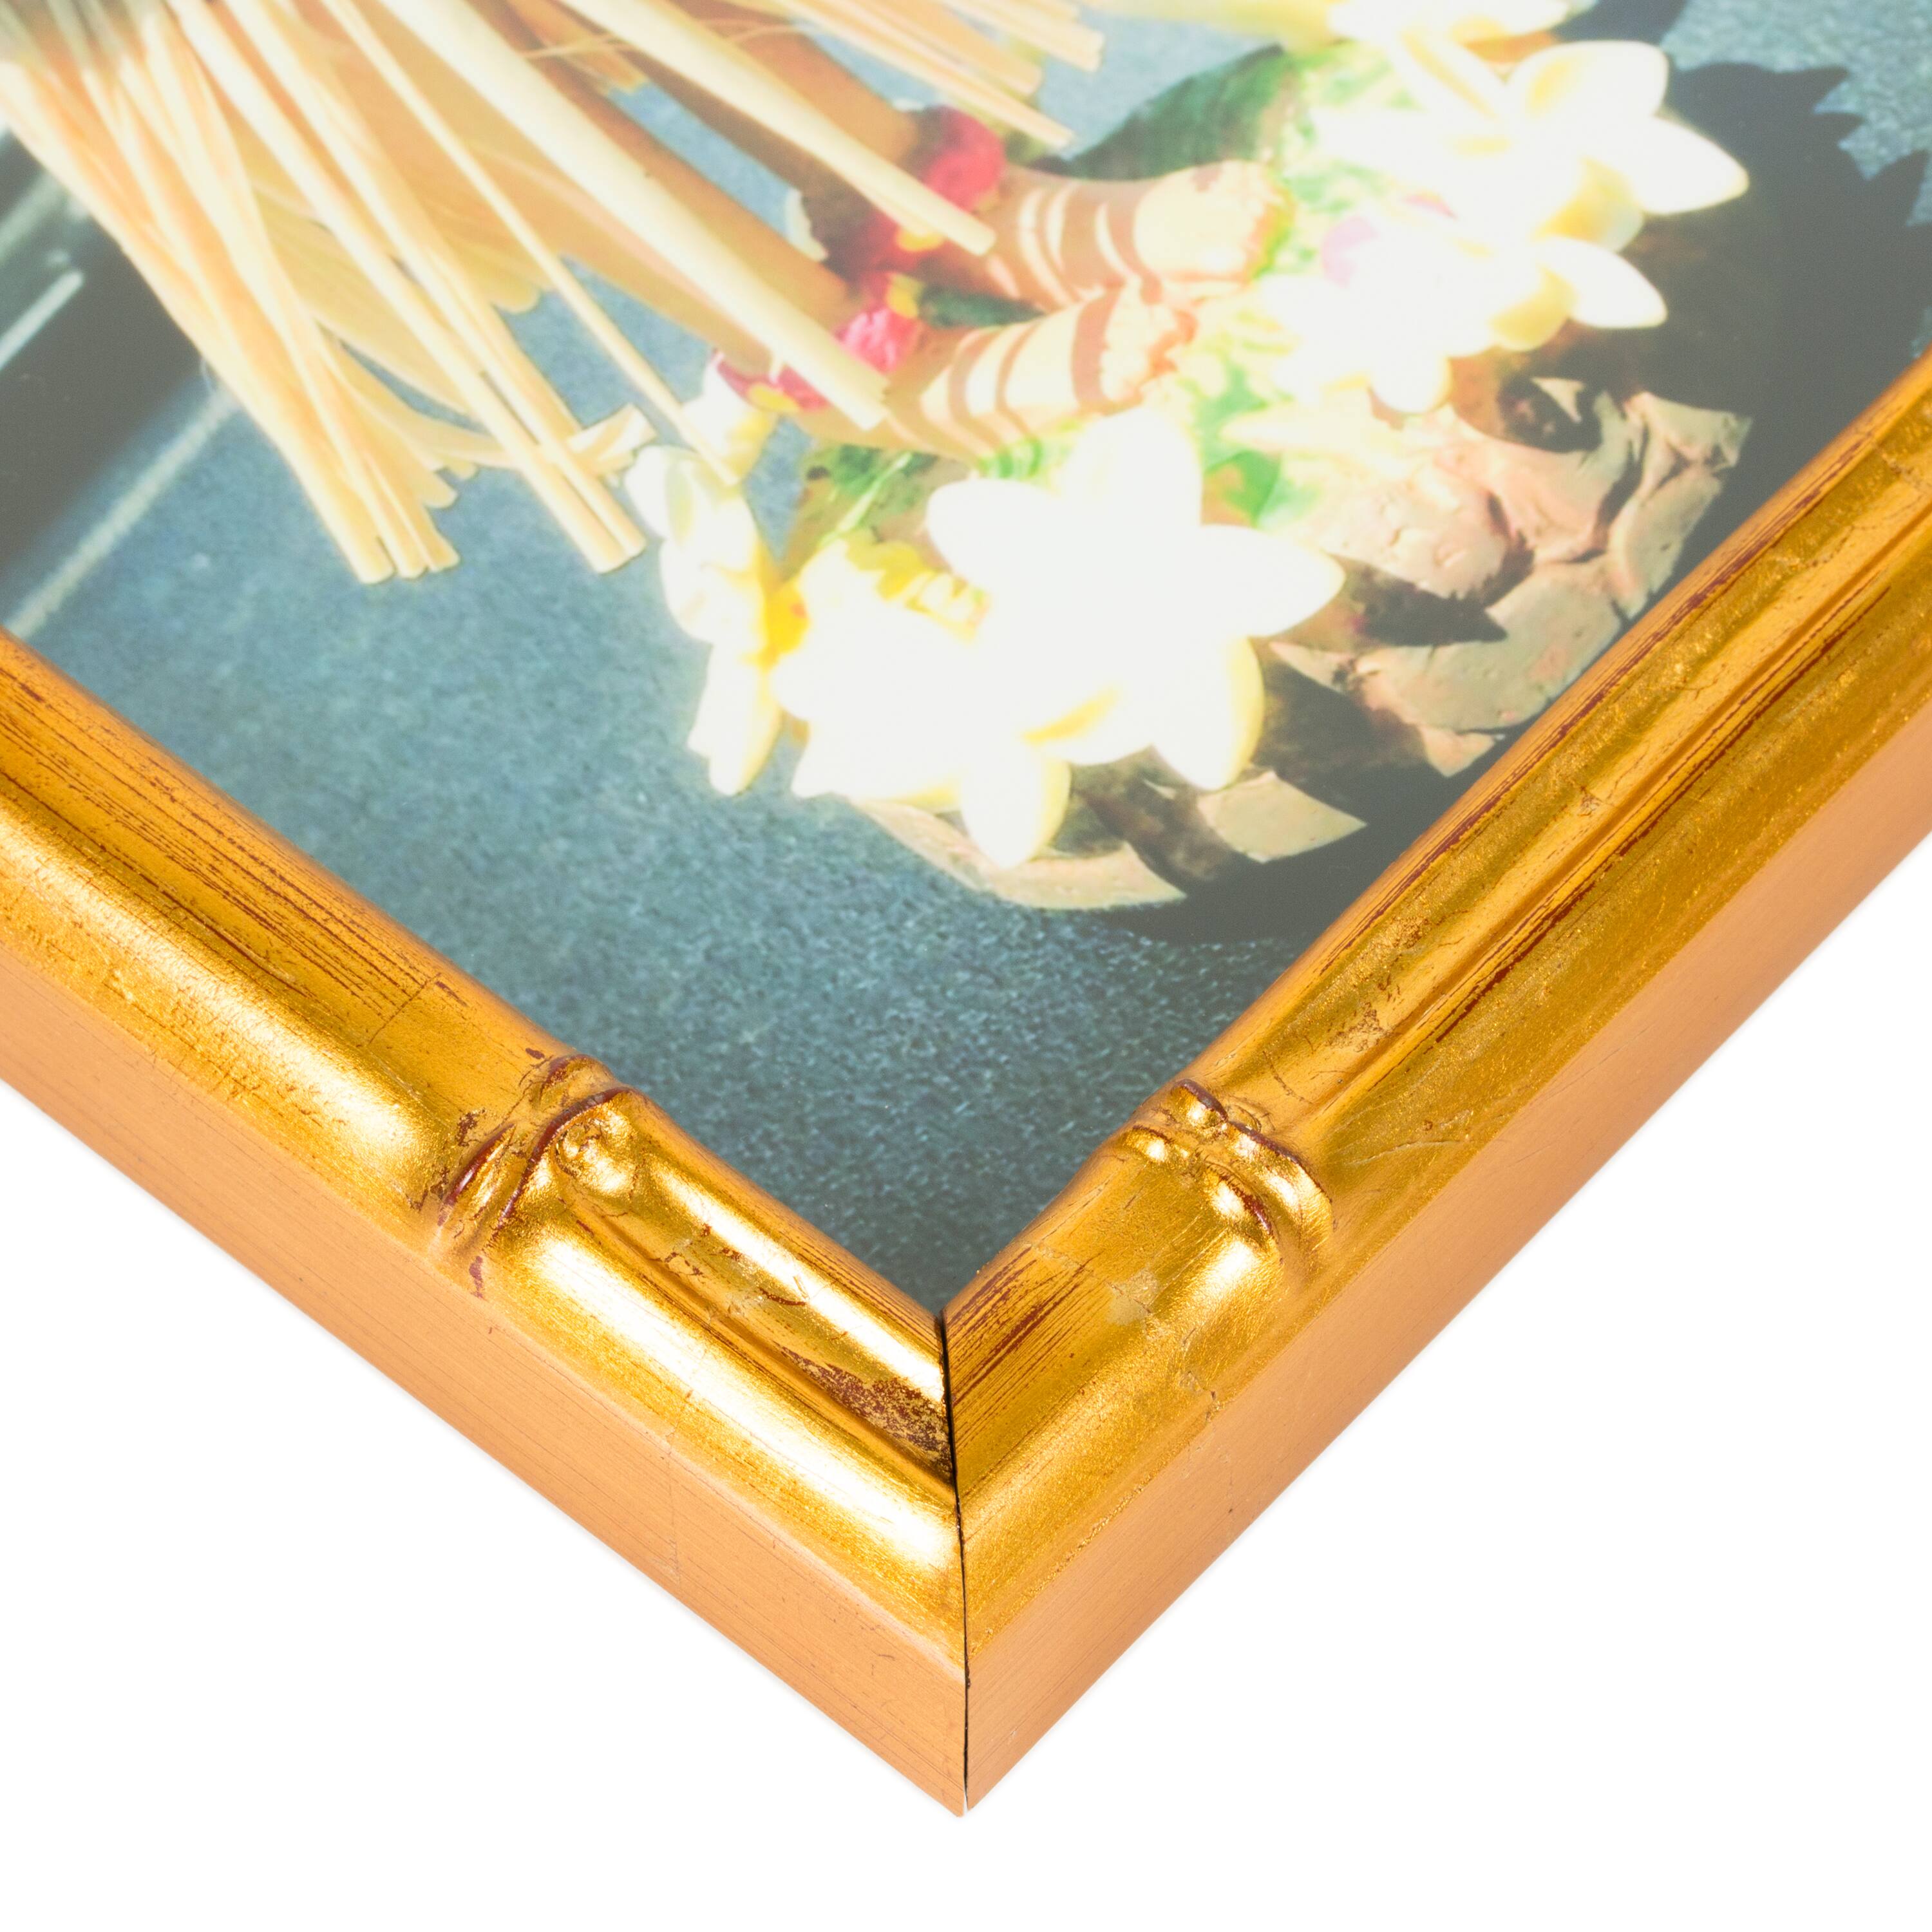 Craig Frames Vintage Bamboo Brushed Gold Picture Frame with Mat